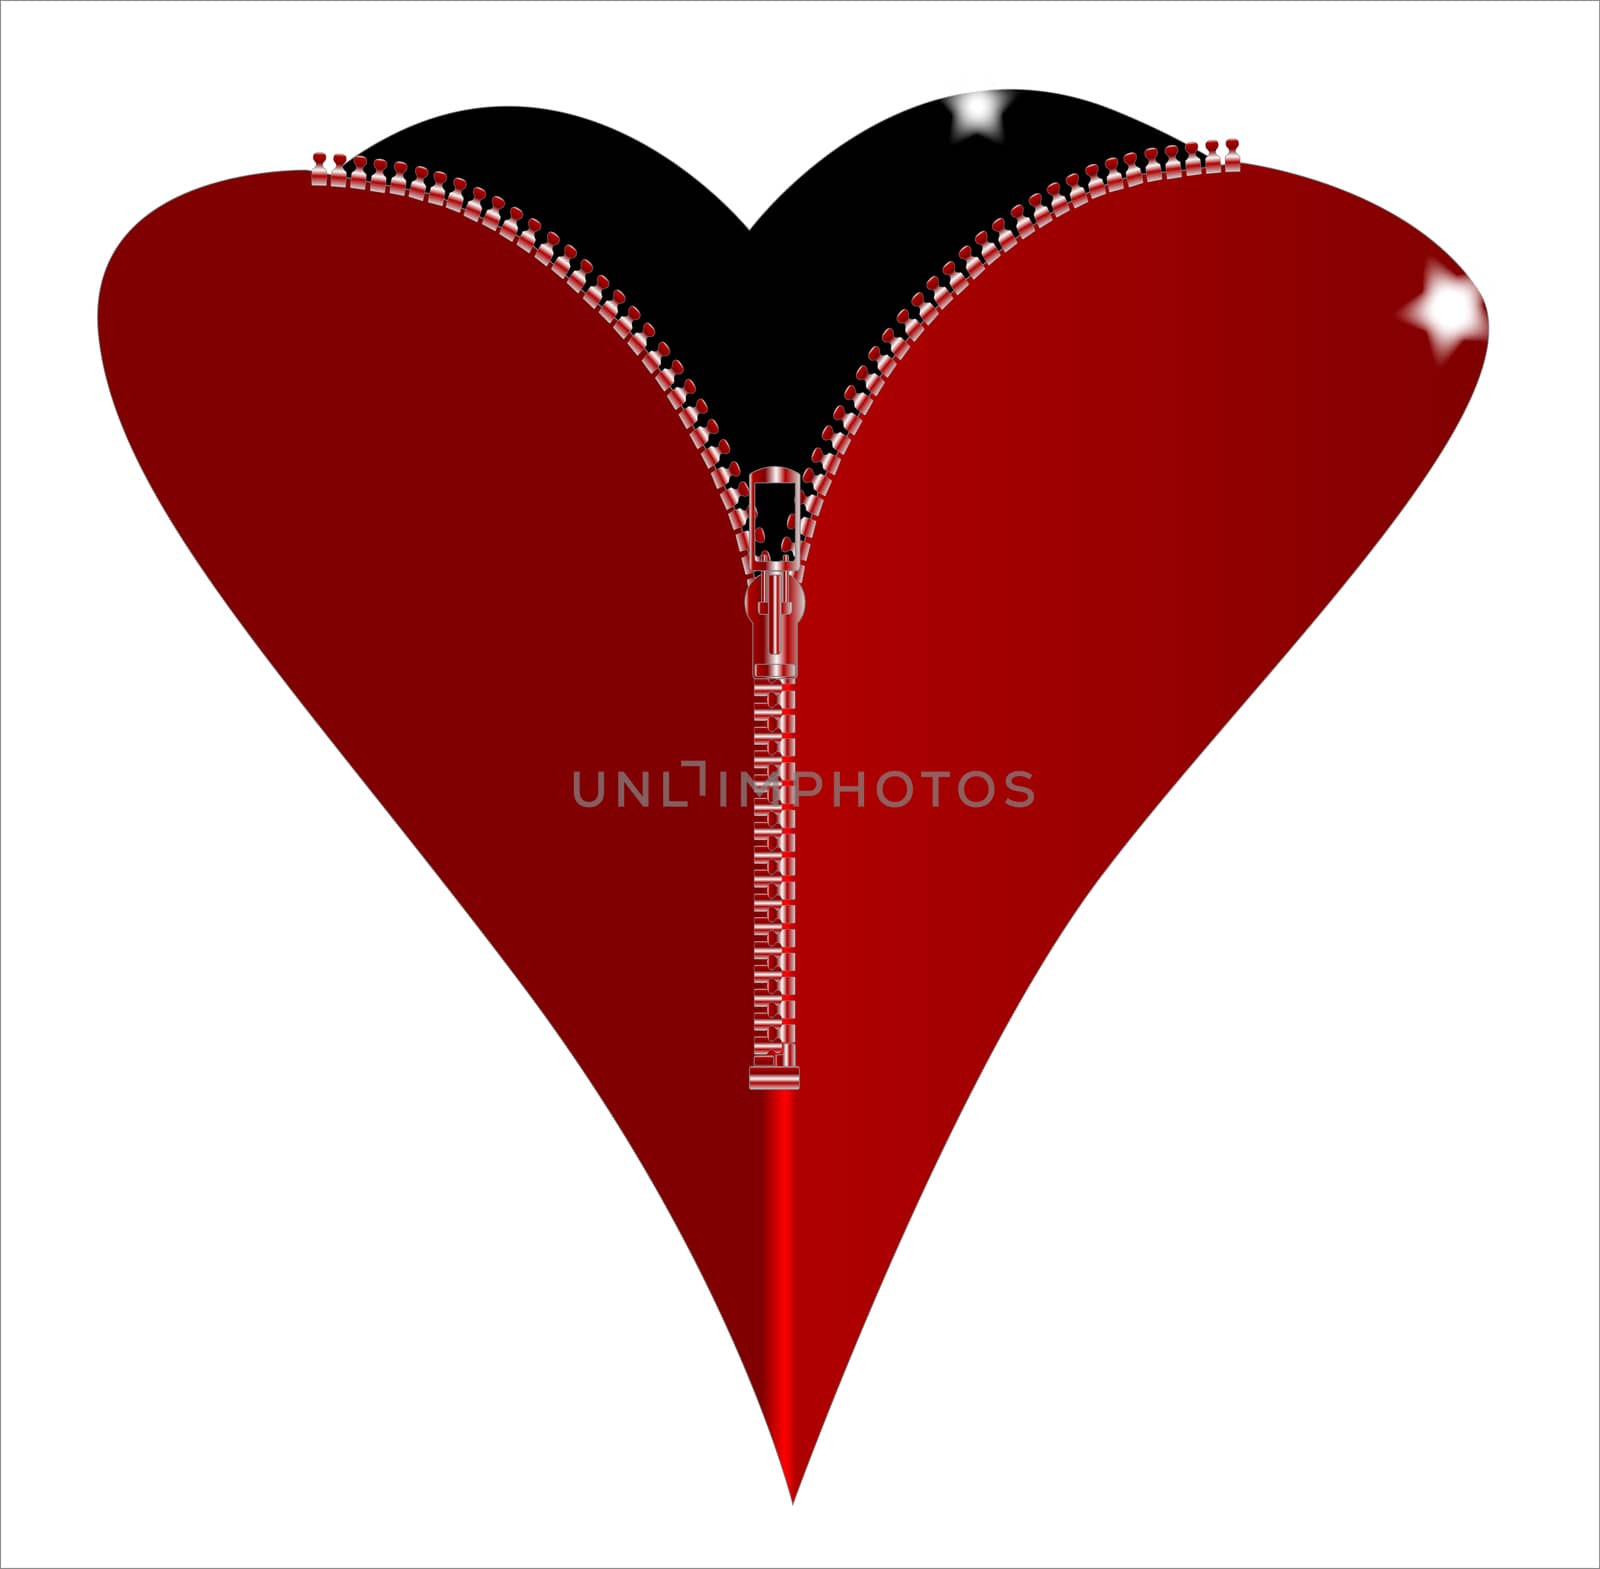 A red heart with a zipper showing a black heart within